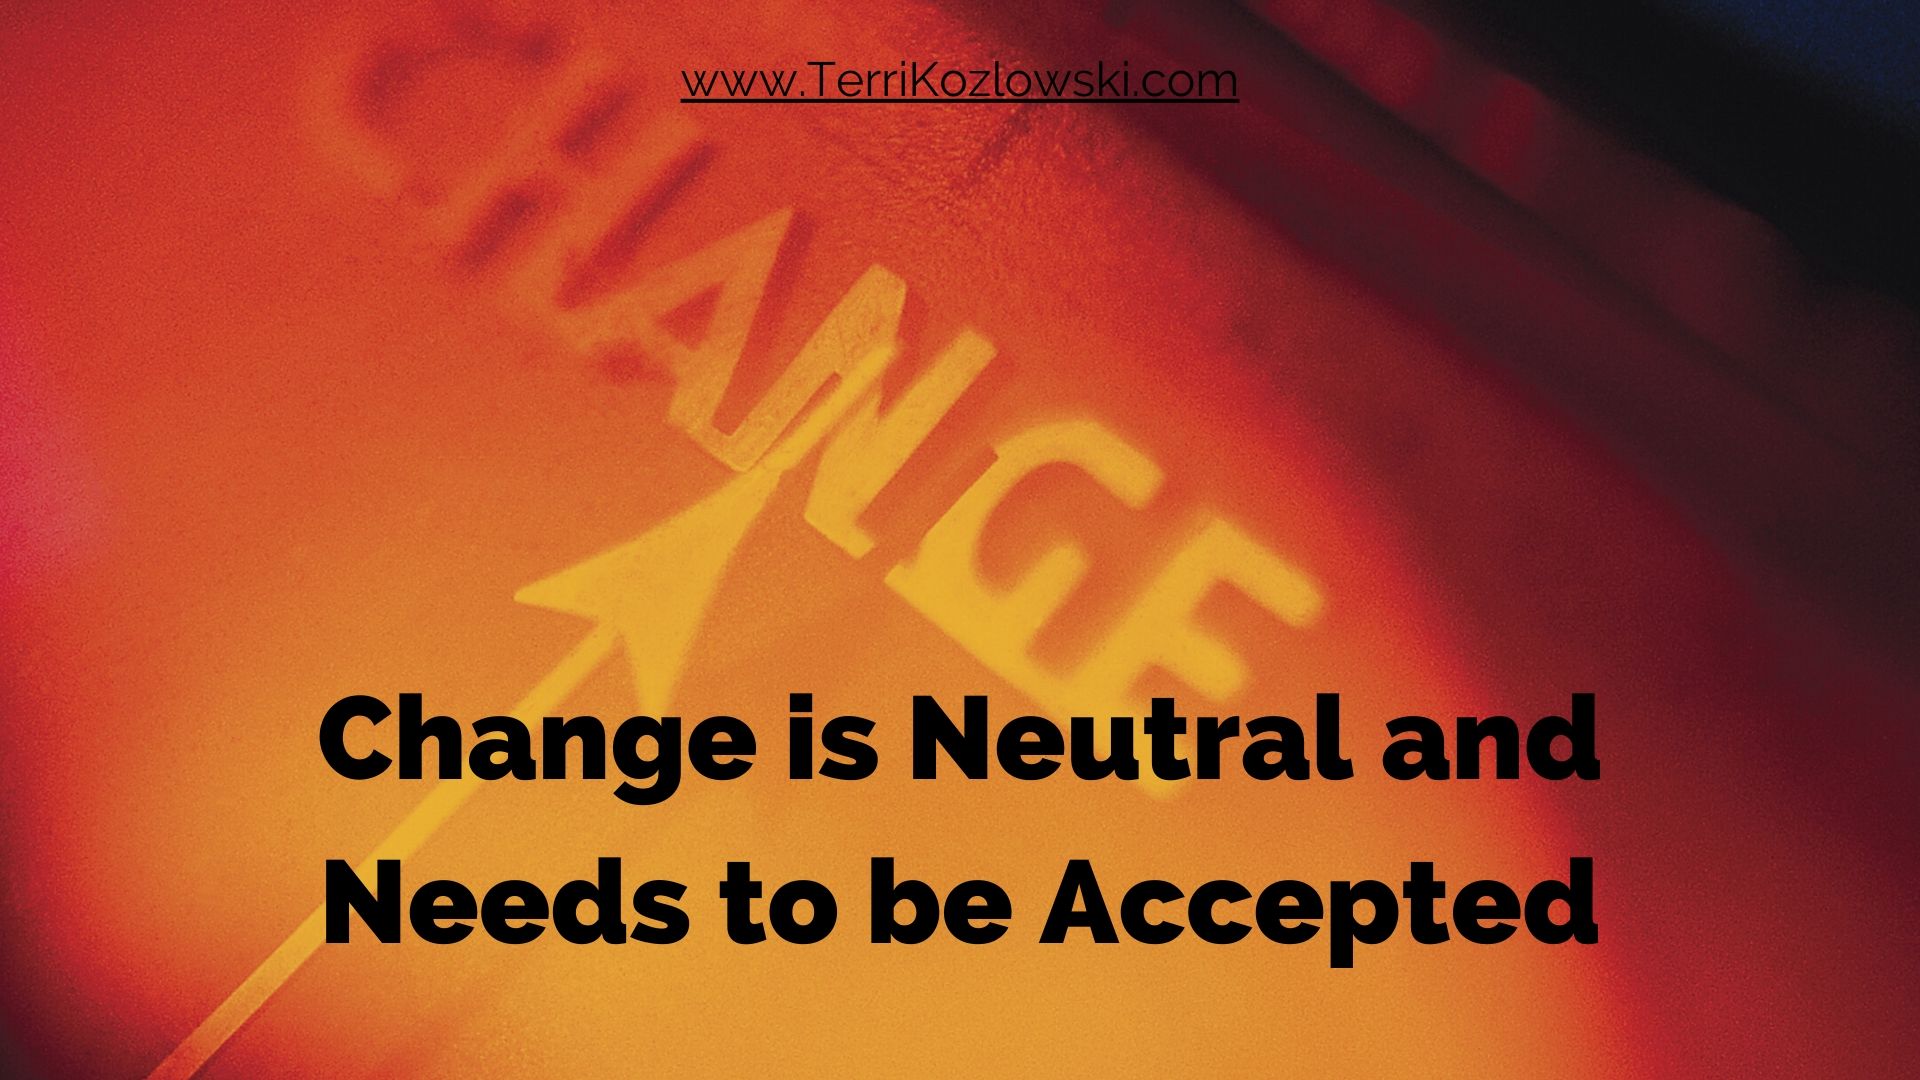 Change is Neutral and Needs to be Accepted